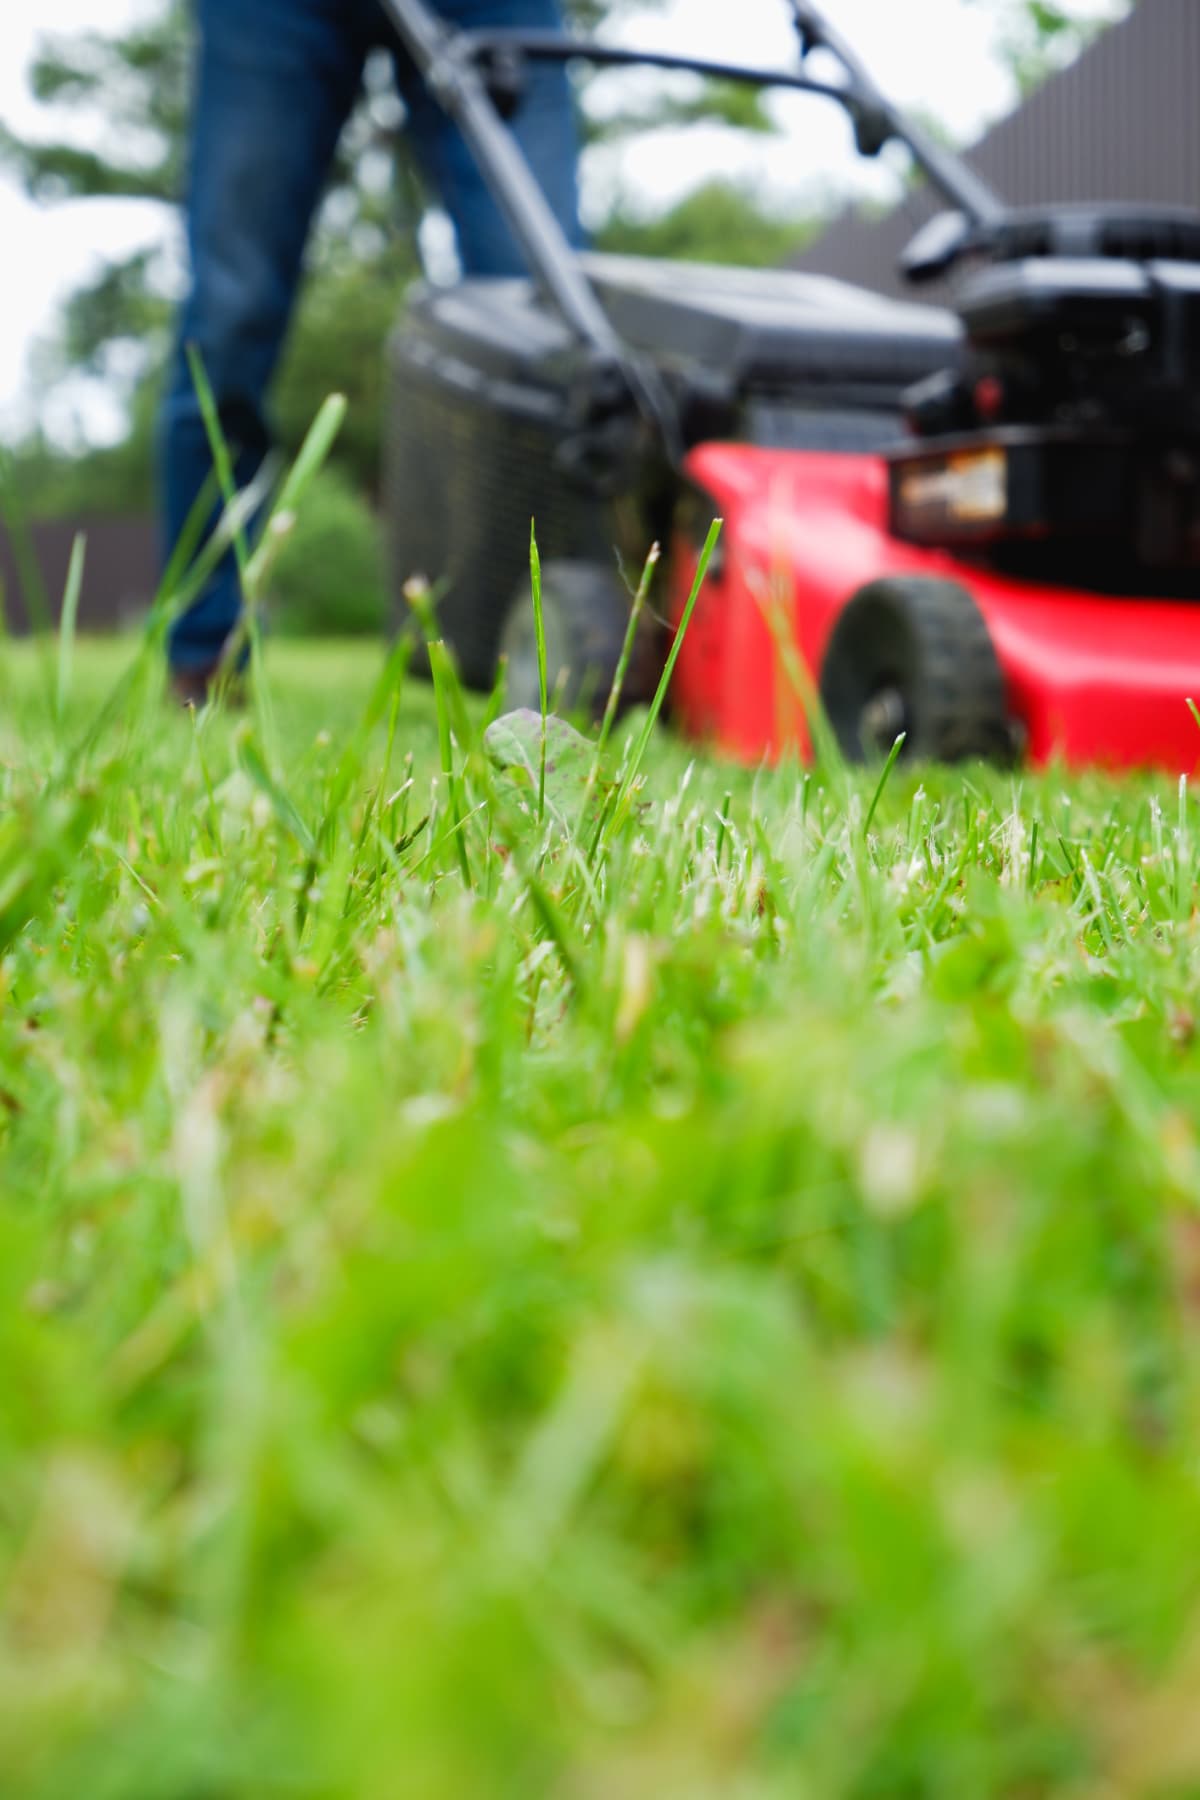 A man mowing lawn with a mower